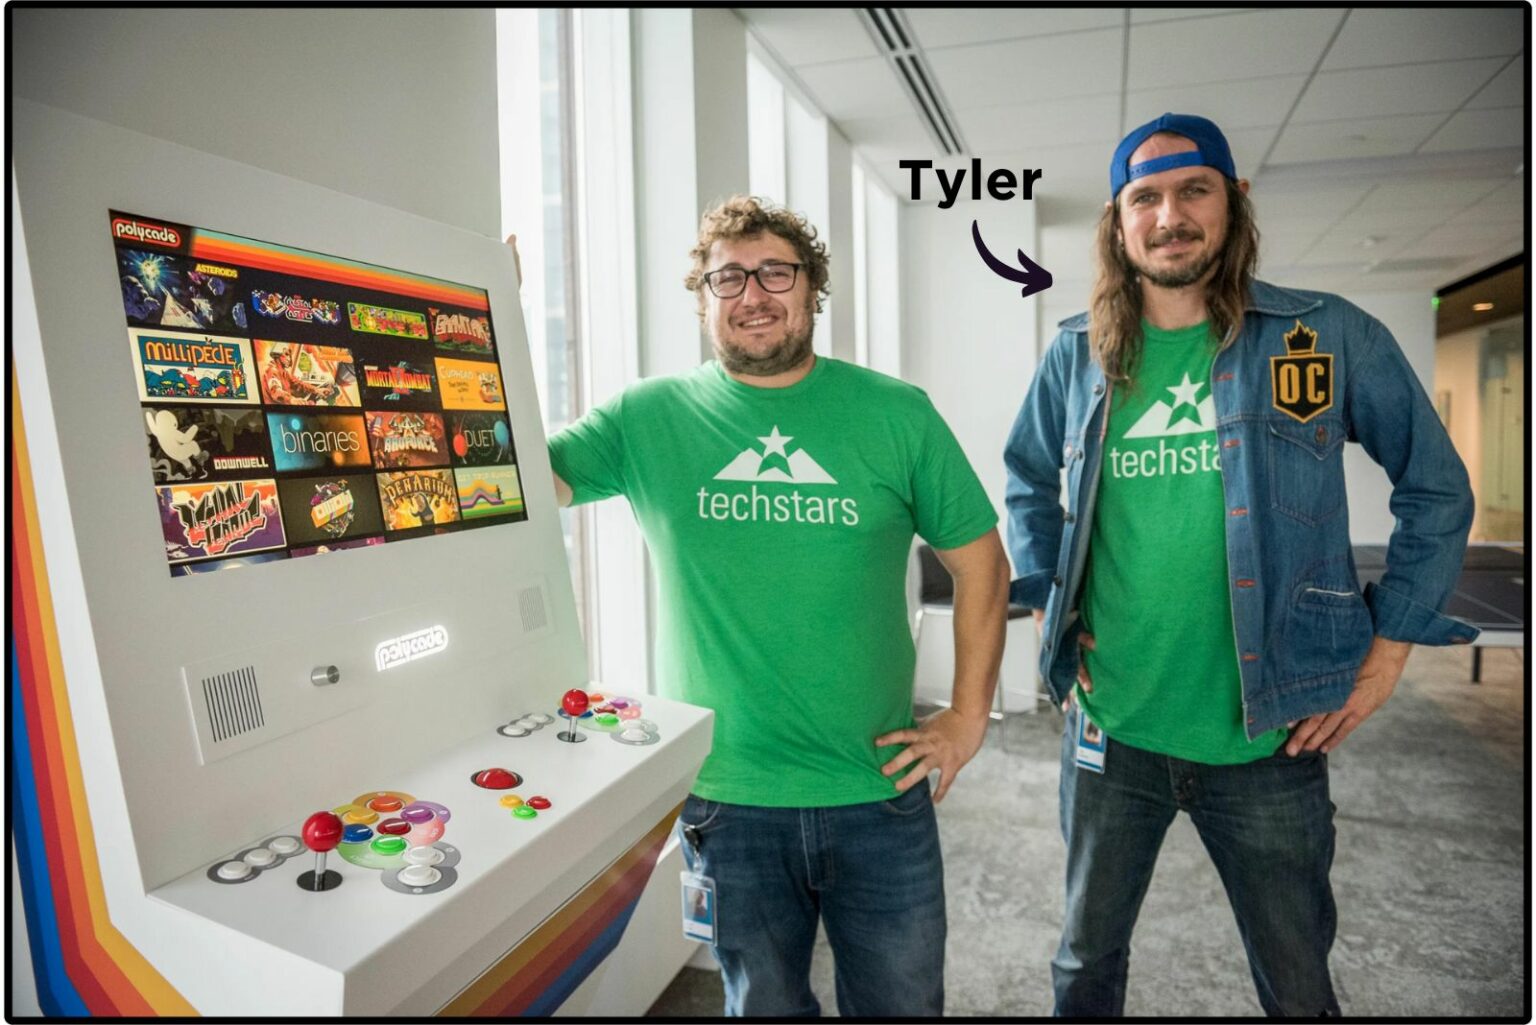 Two bearded men in green "techstars" tee-shirts standing next to a poster covered in cabinet art from vintage arcade games. An arrow from the name "Tyler" is pointing to the taller one wearing a hat and jean jacket. 